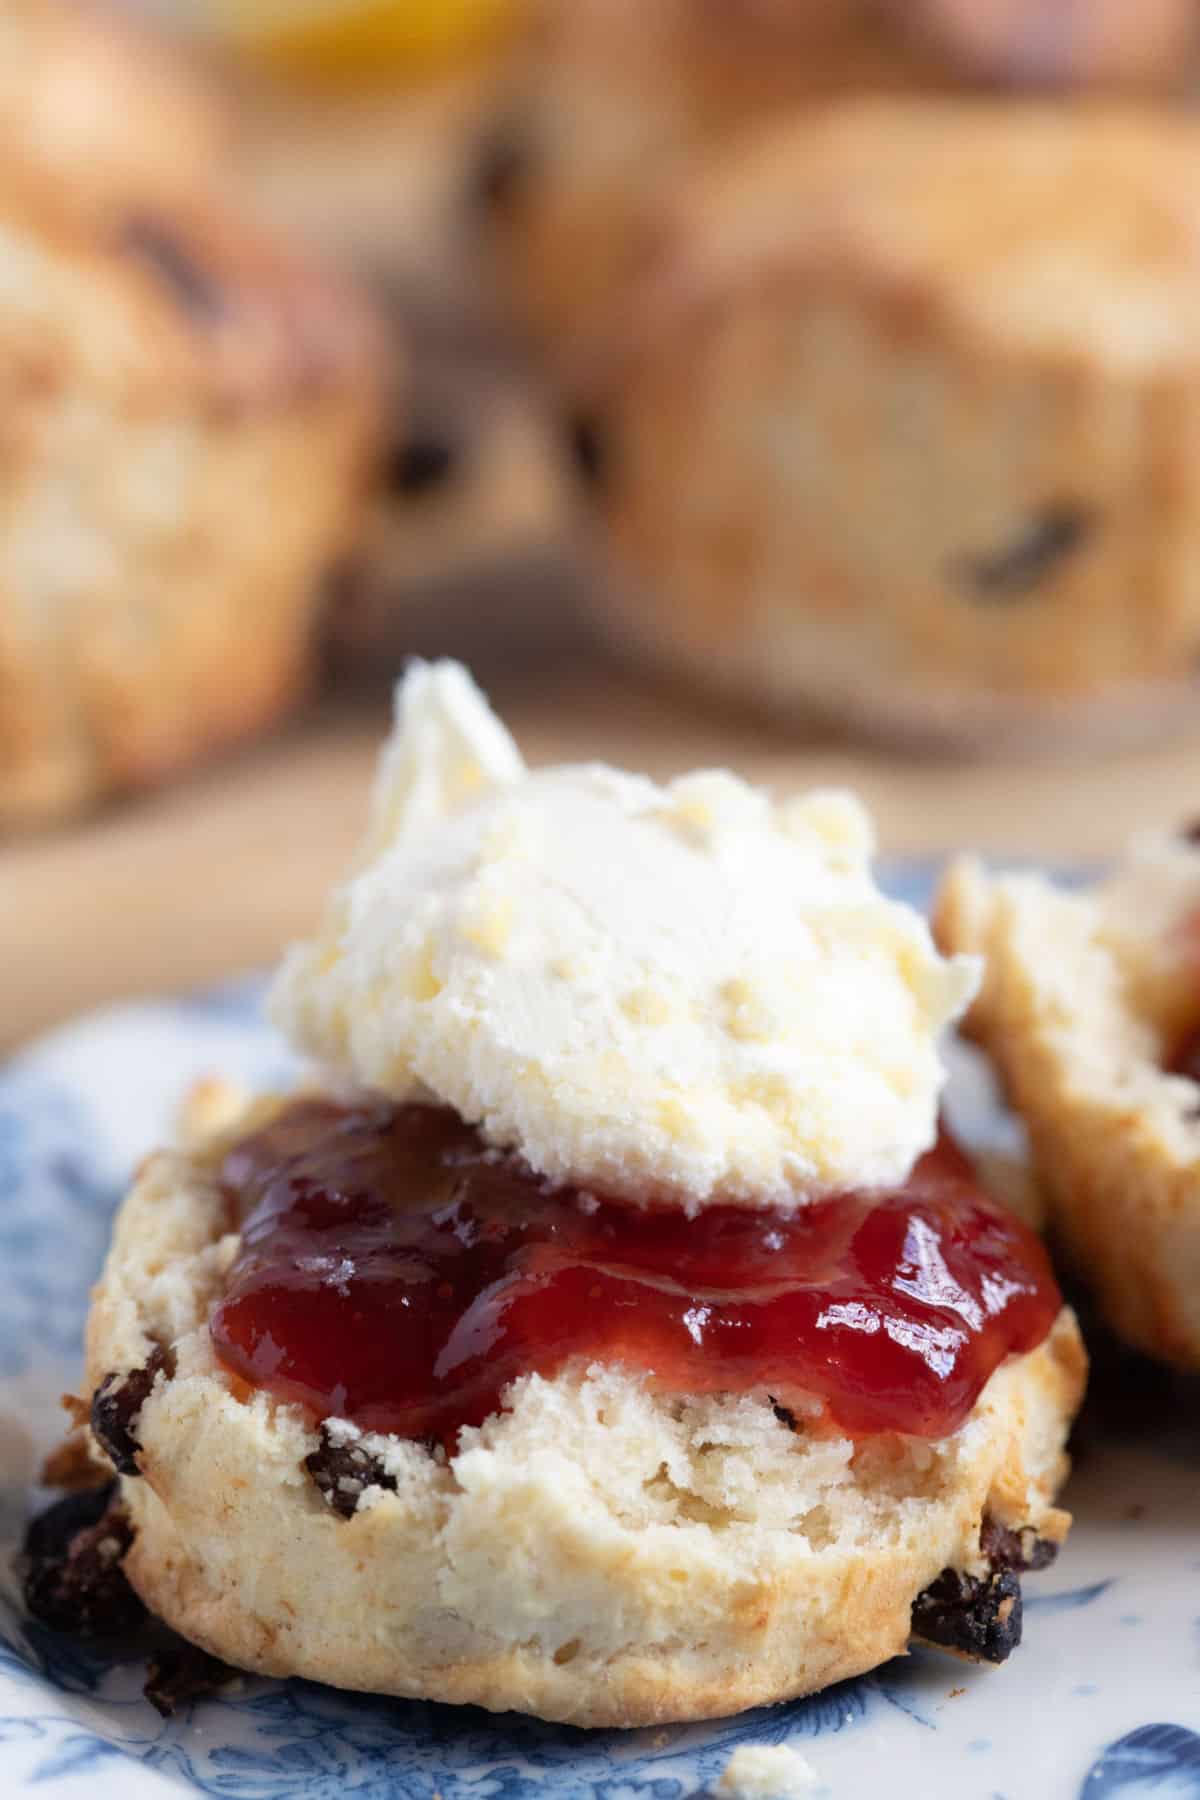 Half a fruit scone spread with jam and clotted cream.